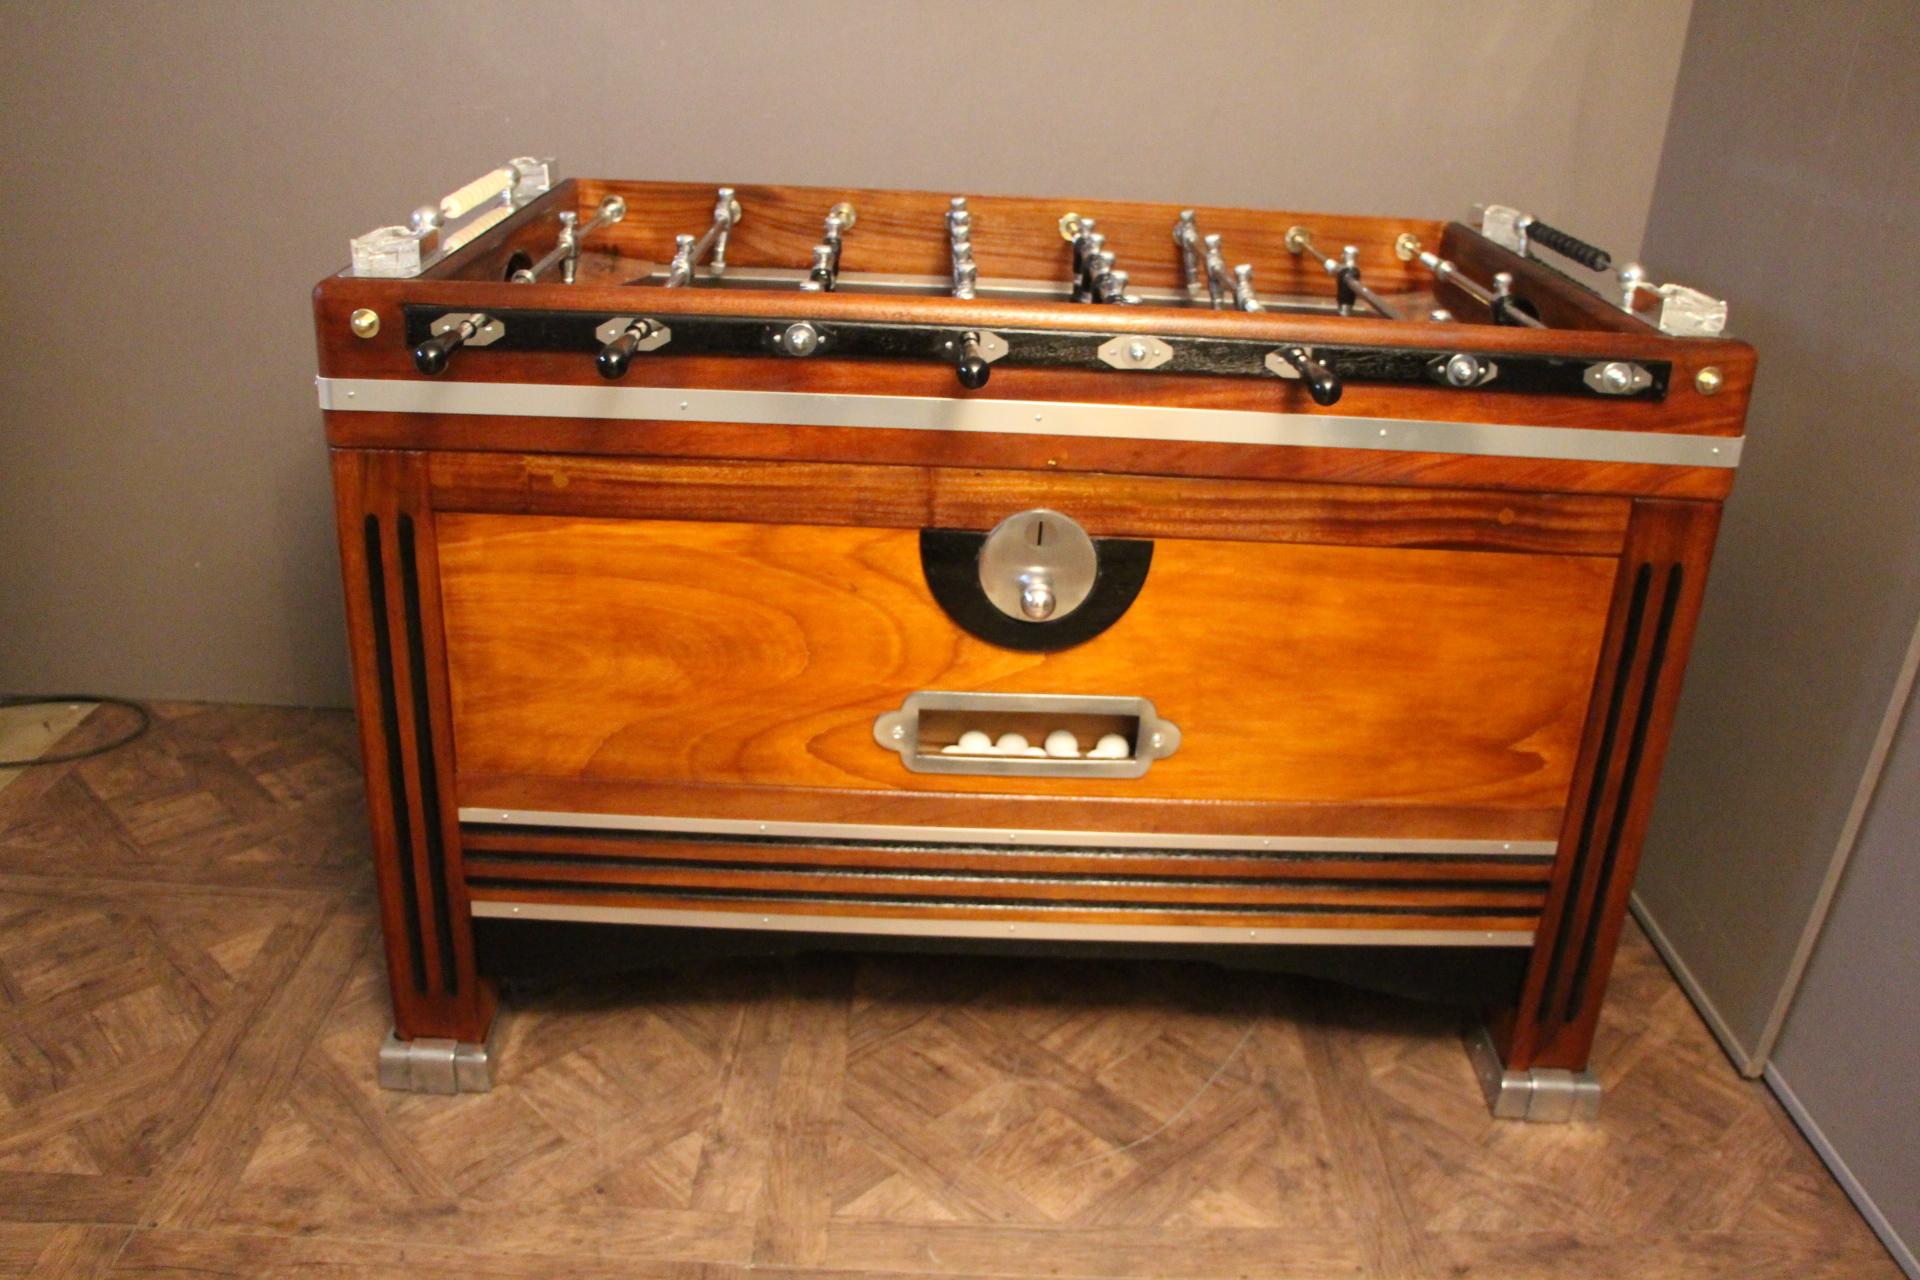 Unusual shape of French foosball table, this item is spectacular. It is in light color wood and blackened wood and features many aluminum pieces. 
Its players are in black and silver polished aluminum.
Black field and four Lalique crystal